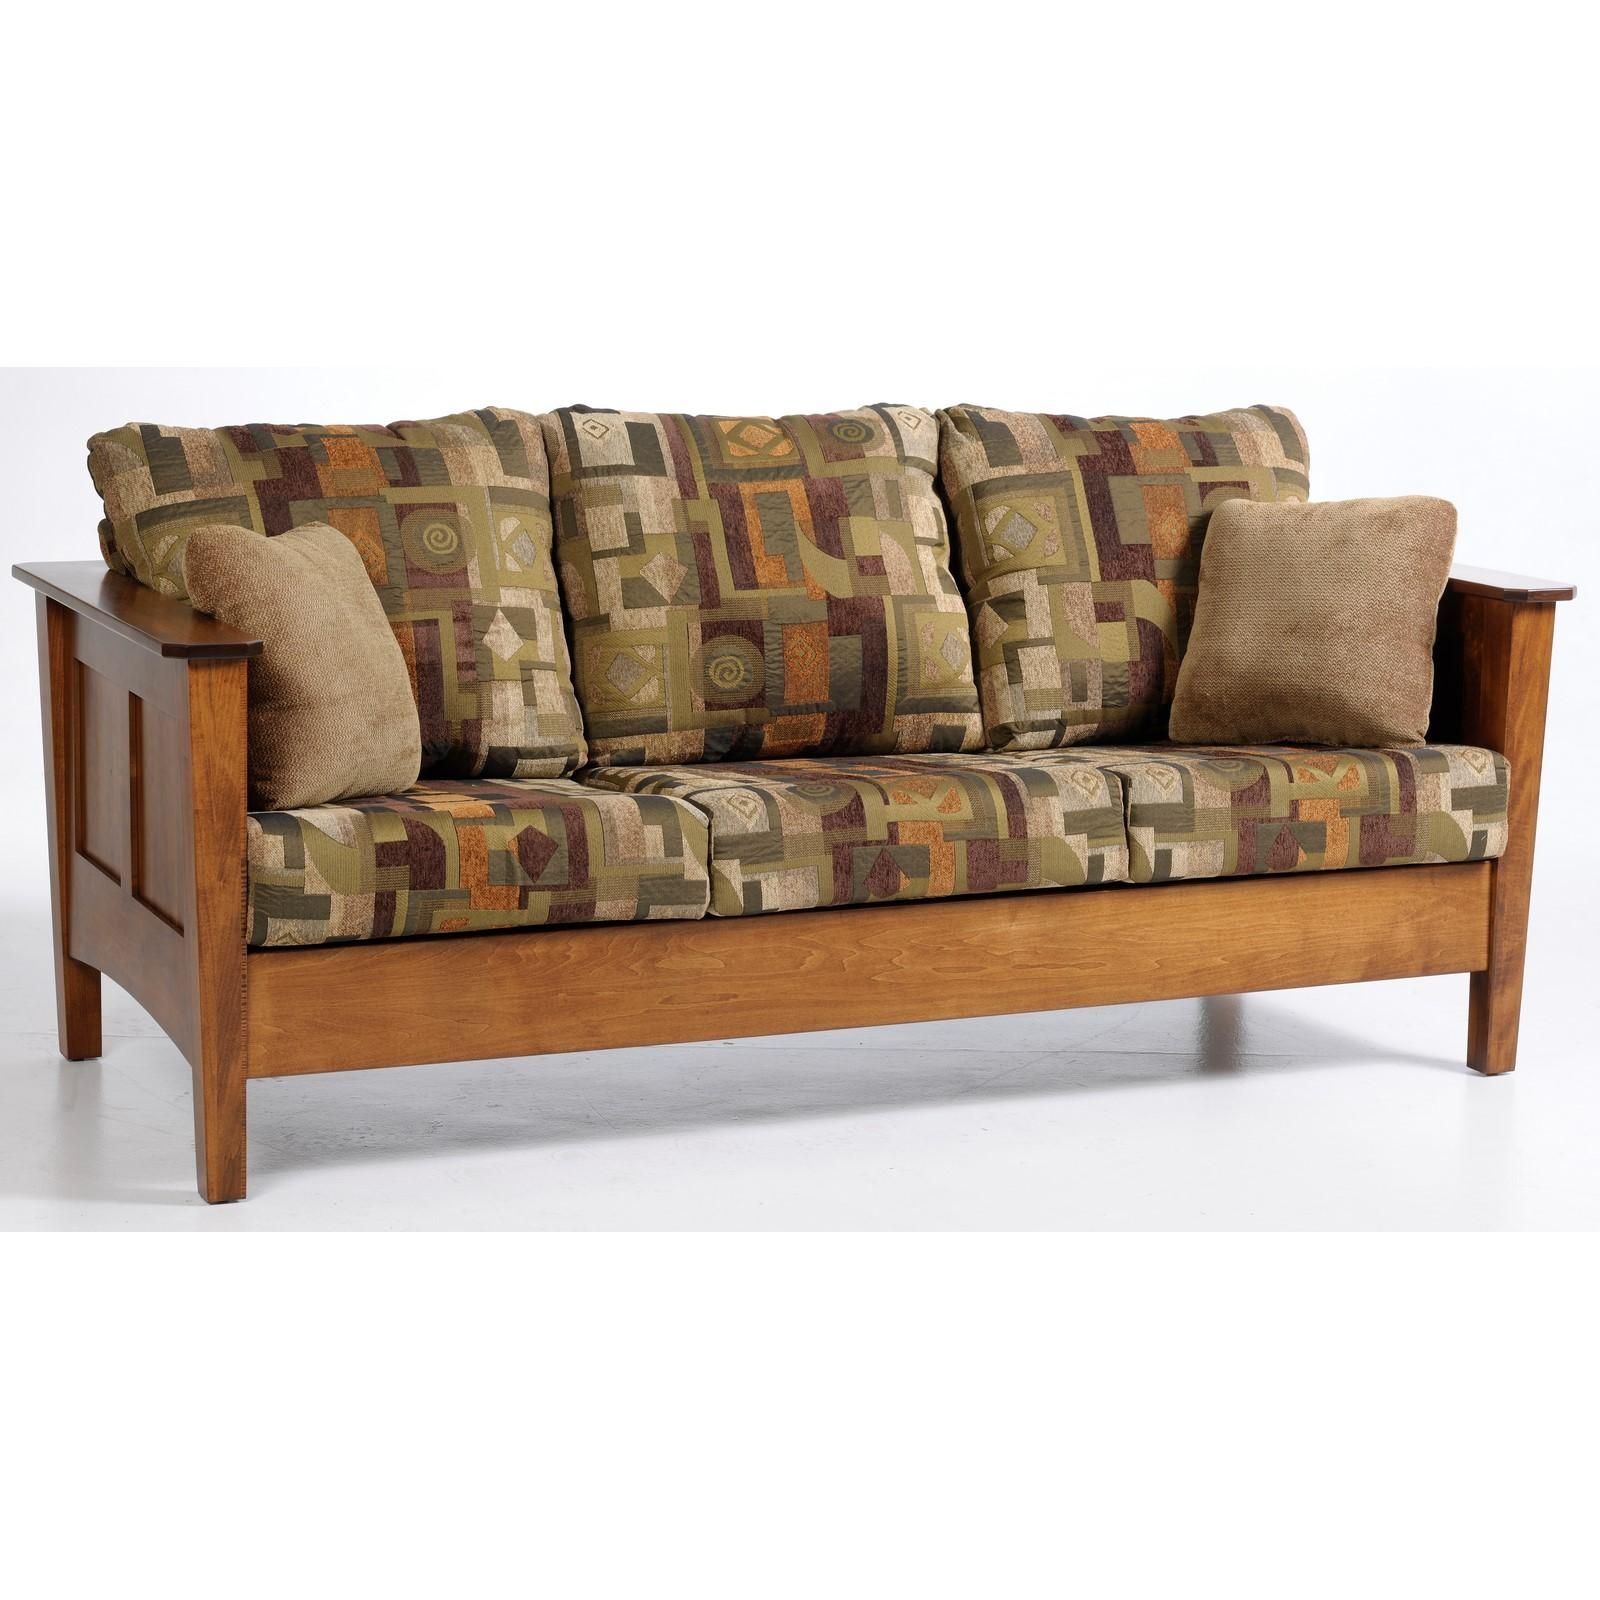 Y & T Urban Shaker 5000 Sofa – Stewart Roth Furniture For Shaker Sofas (View 16 of 20)